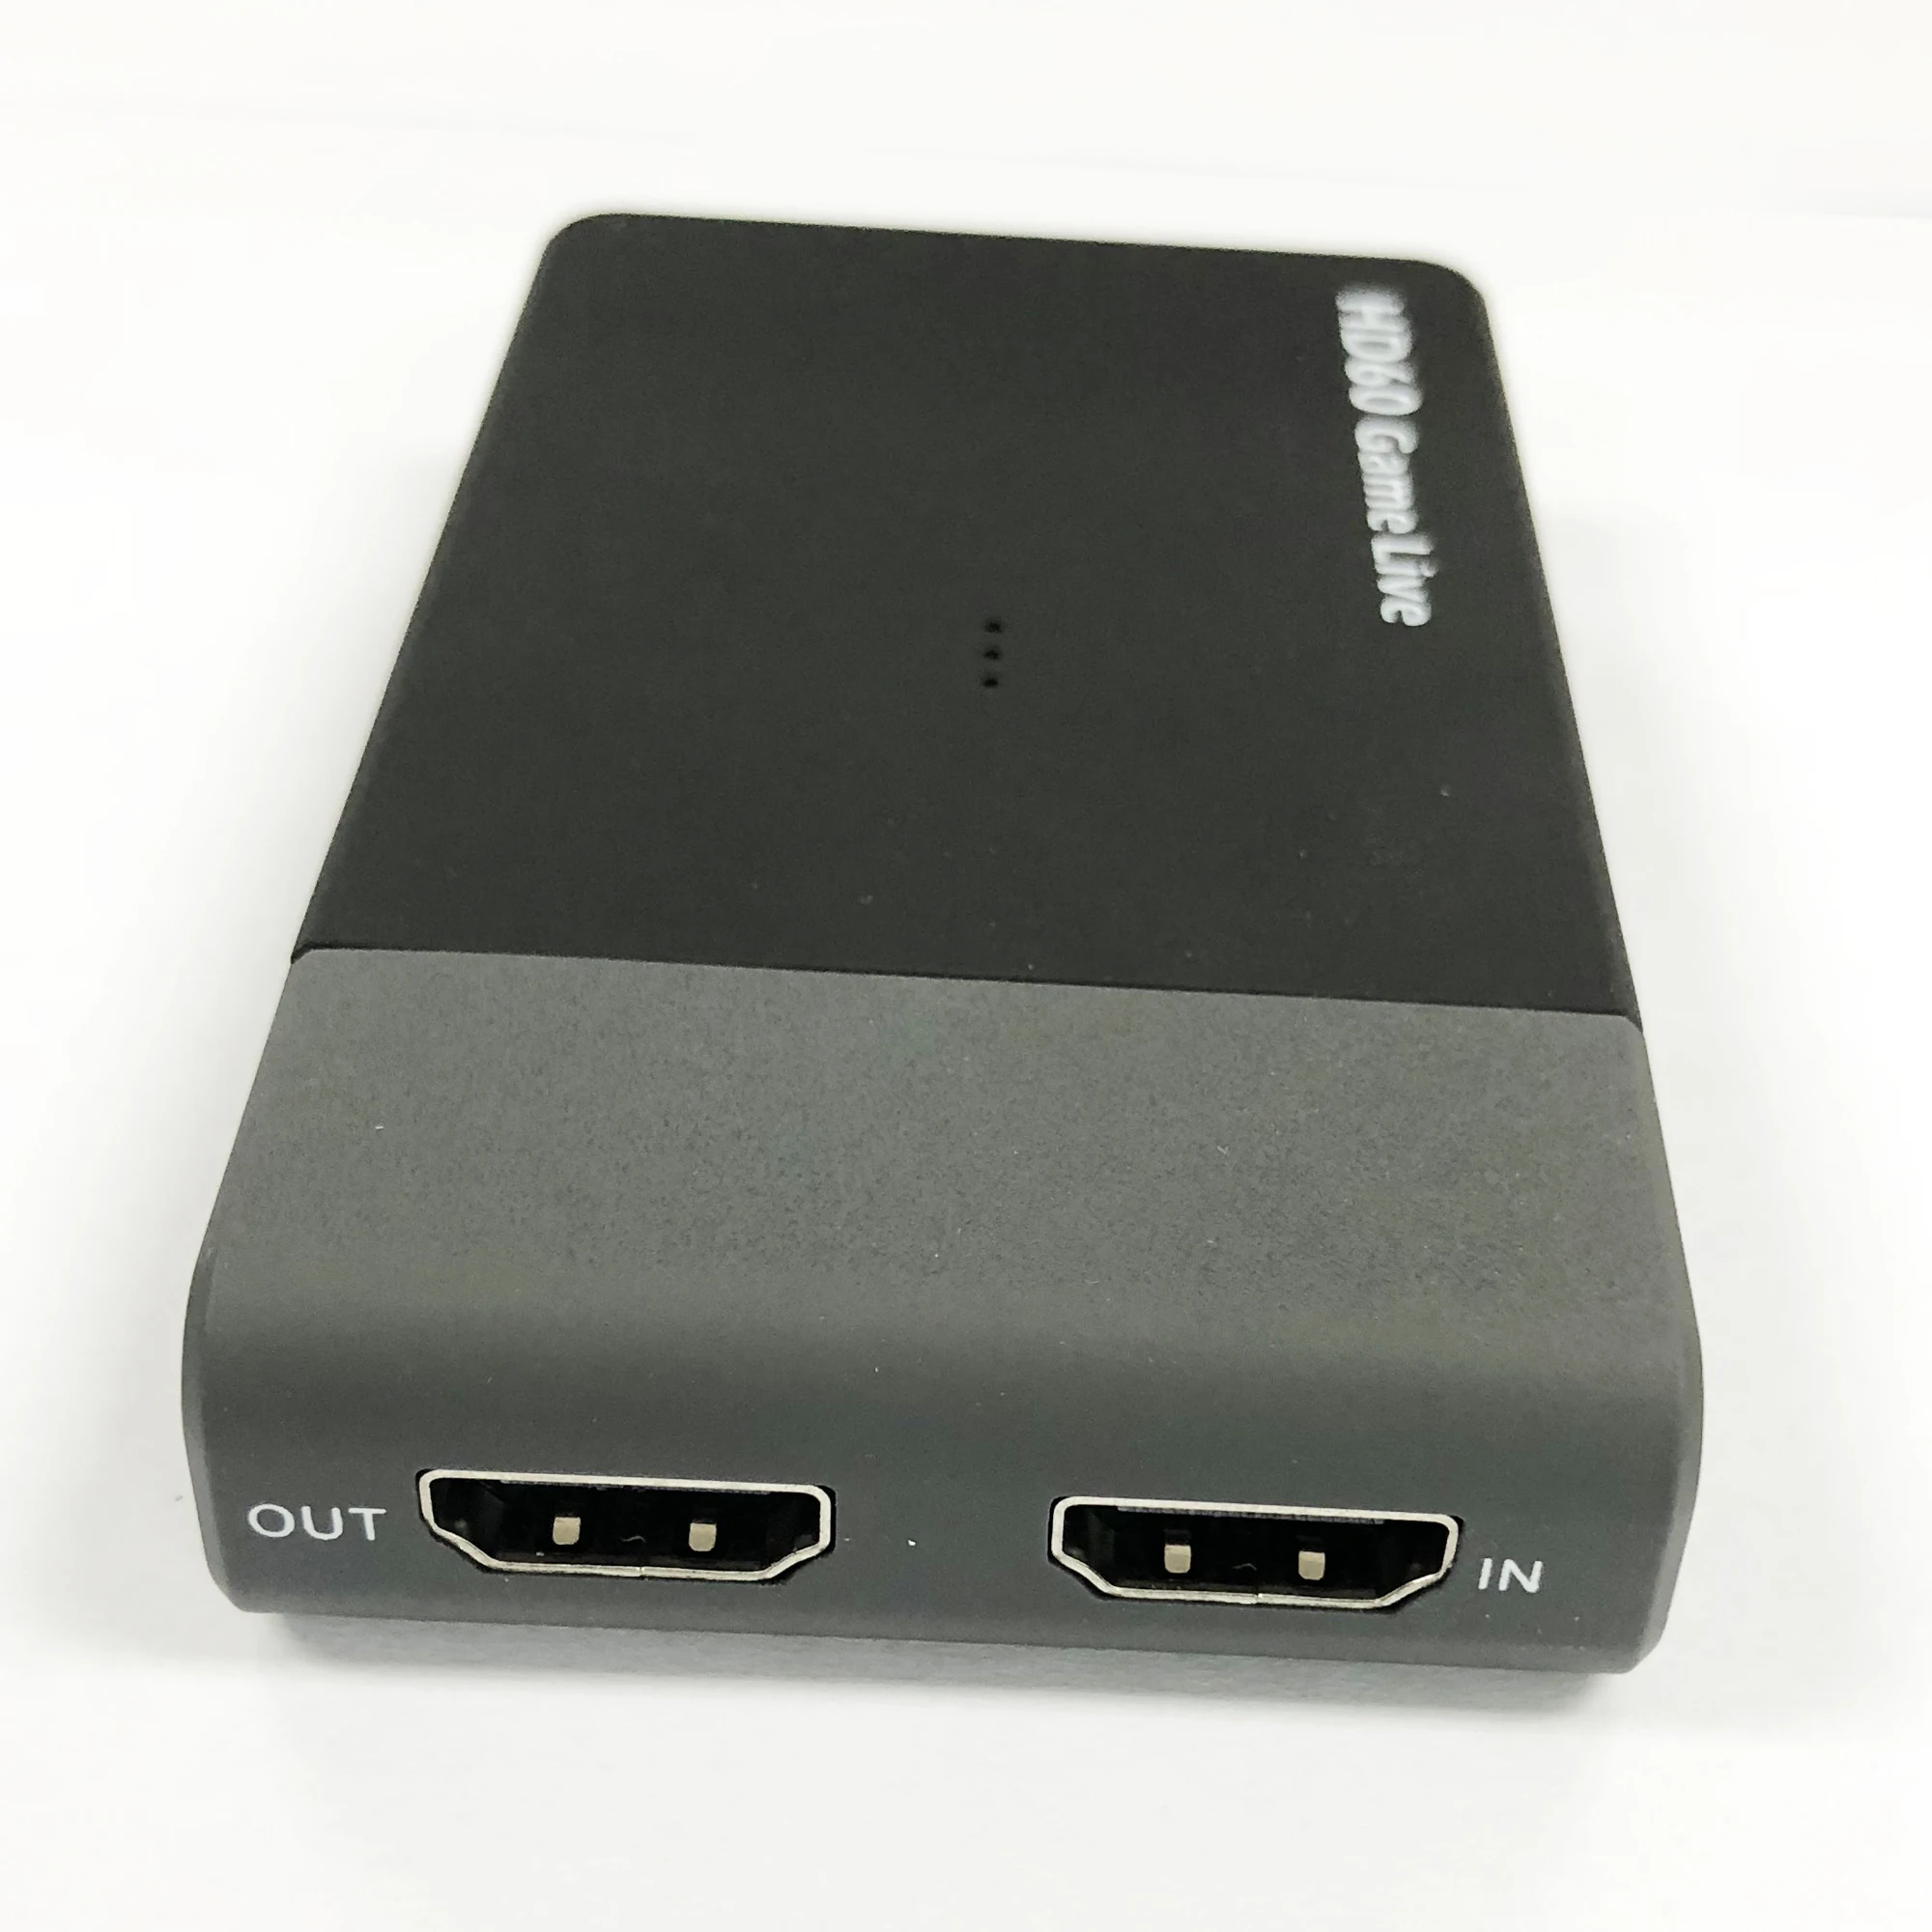 Ezcap261m Hdmi To Usb 3.0 Uvc Game Video Capture Card,Live Streaming